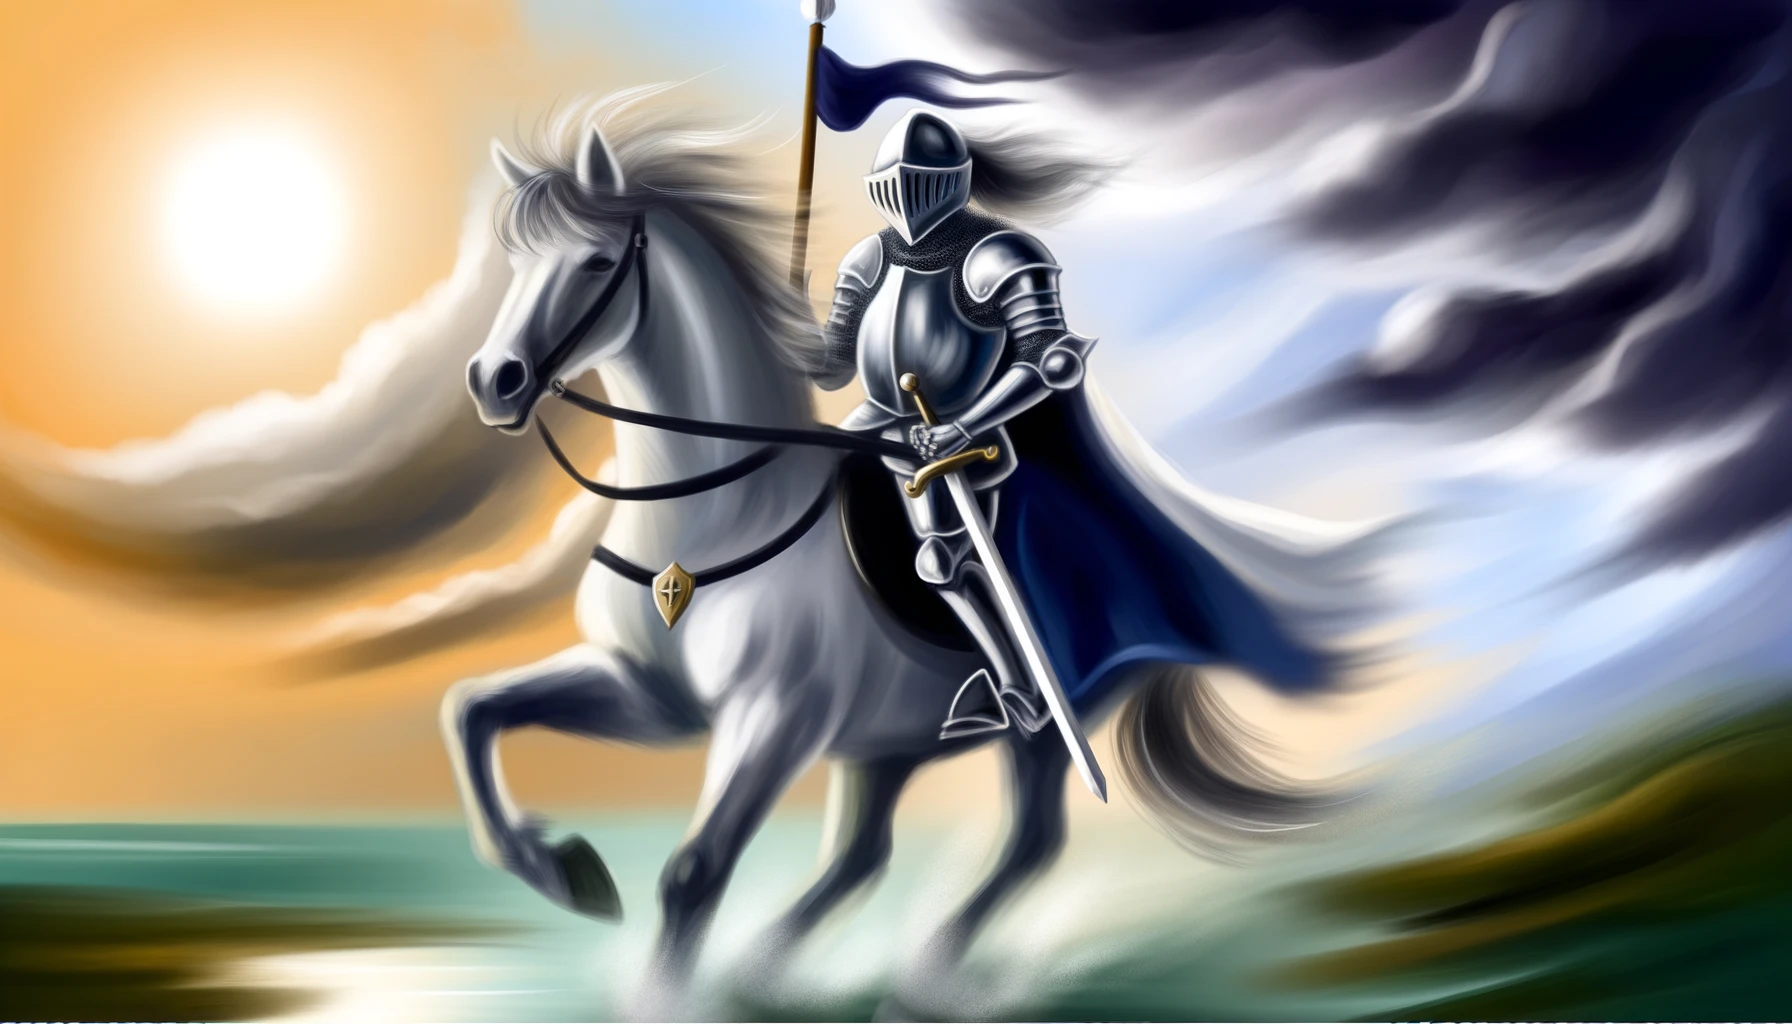 "A series of images depicting the Knight of Swords tarot card, showcasing traits such as intelligence, bravery, decisiveness, impulsiveness, and aggression. Each image portrays the knight in scenarios reflecting clarity of thought and potential for hasty action, providing visual context for discussing the card's meaning in personality and behavior."